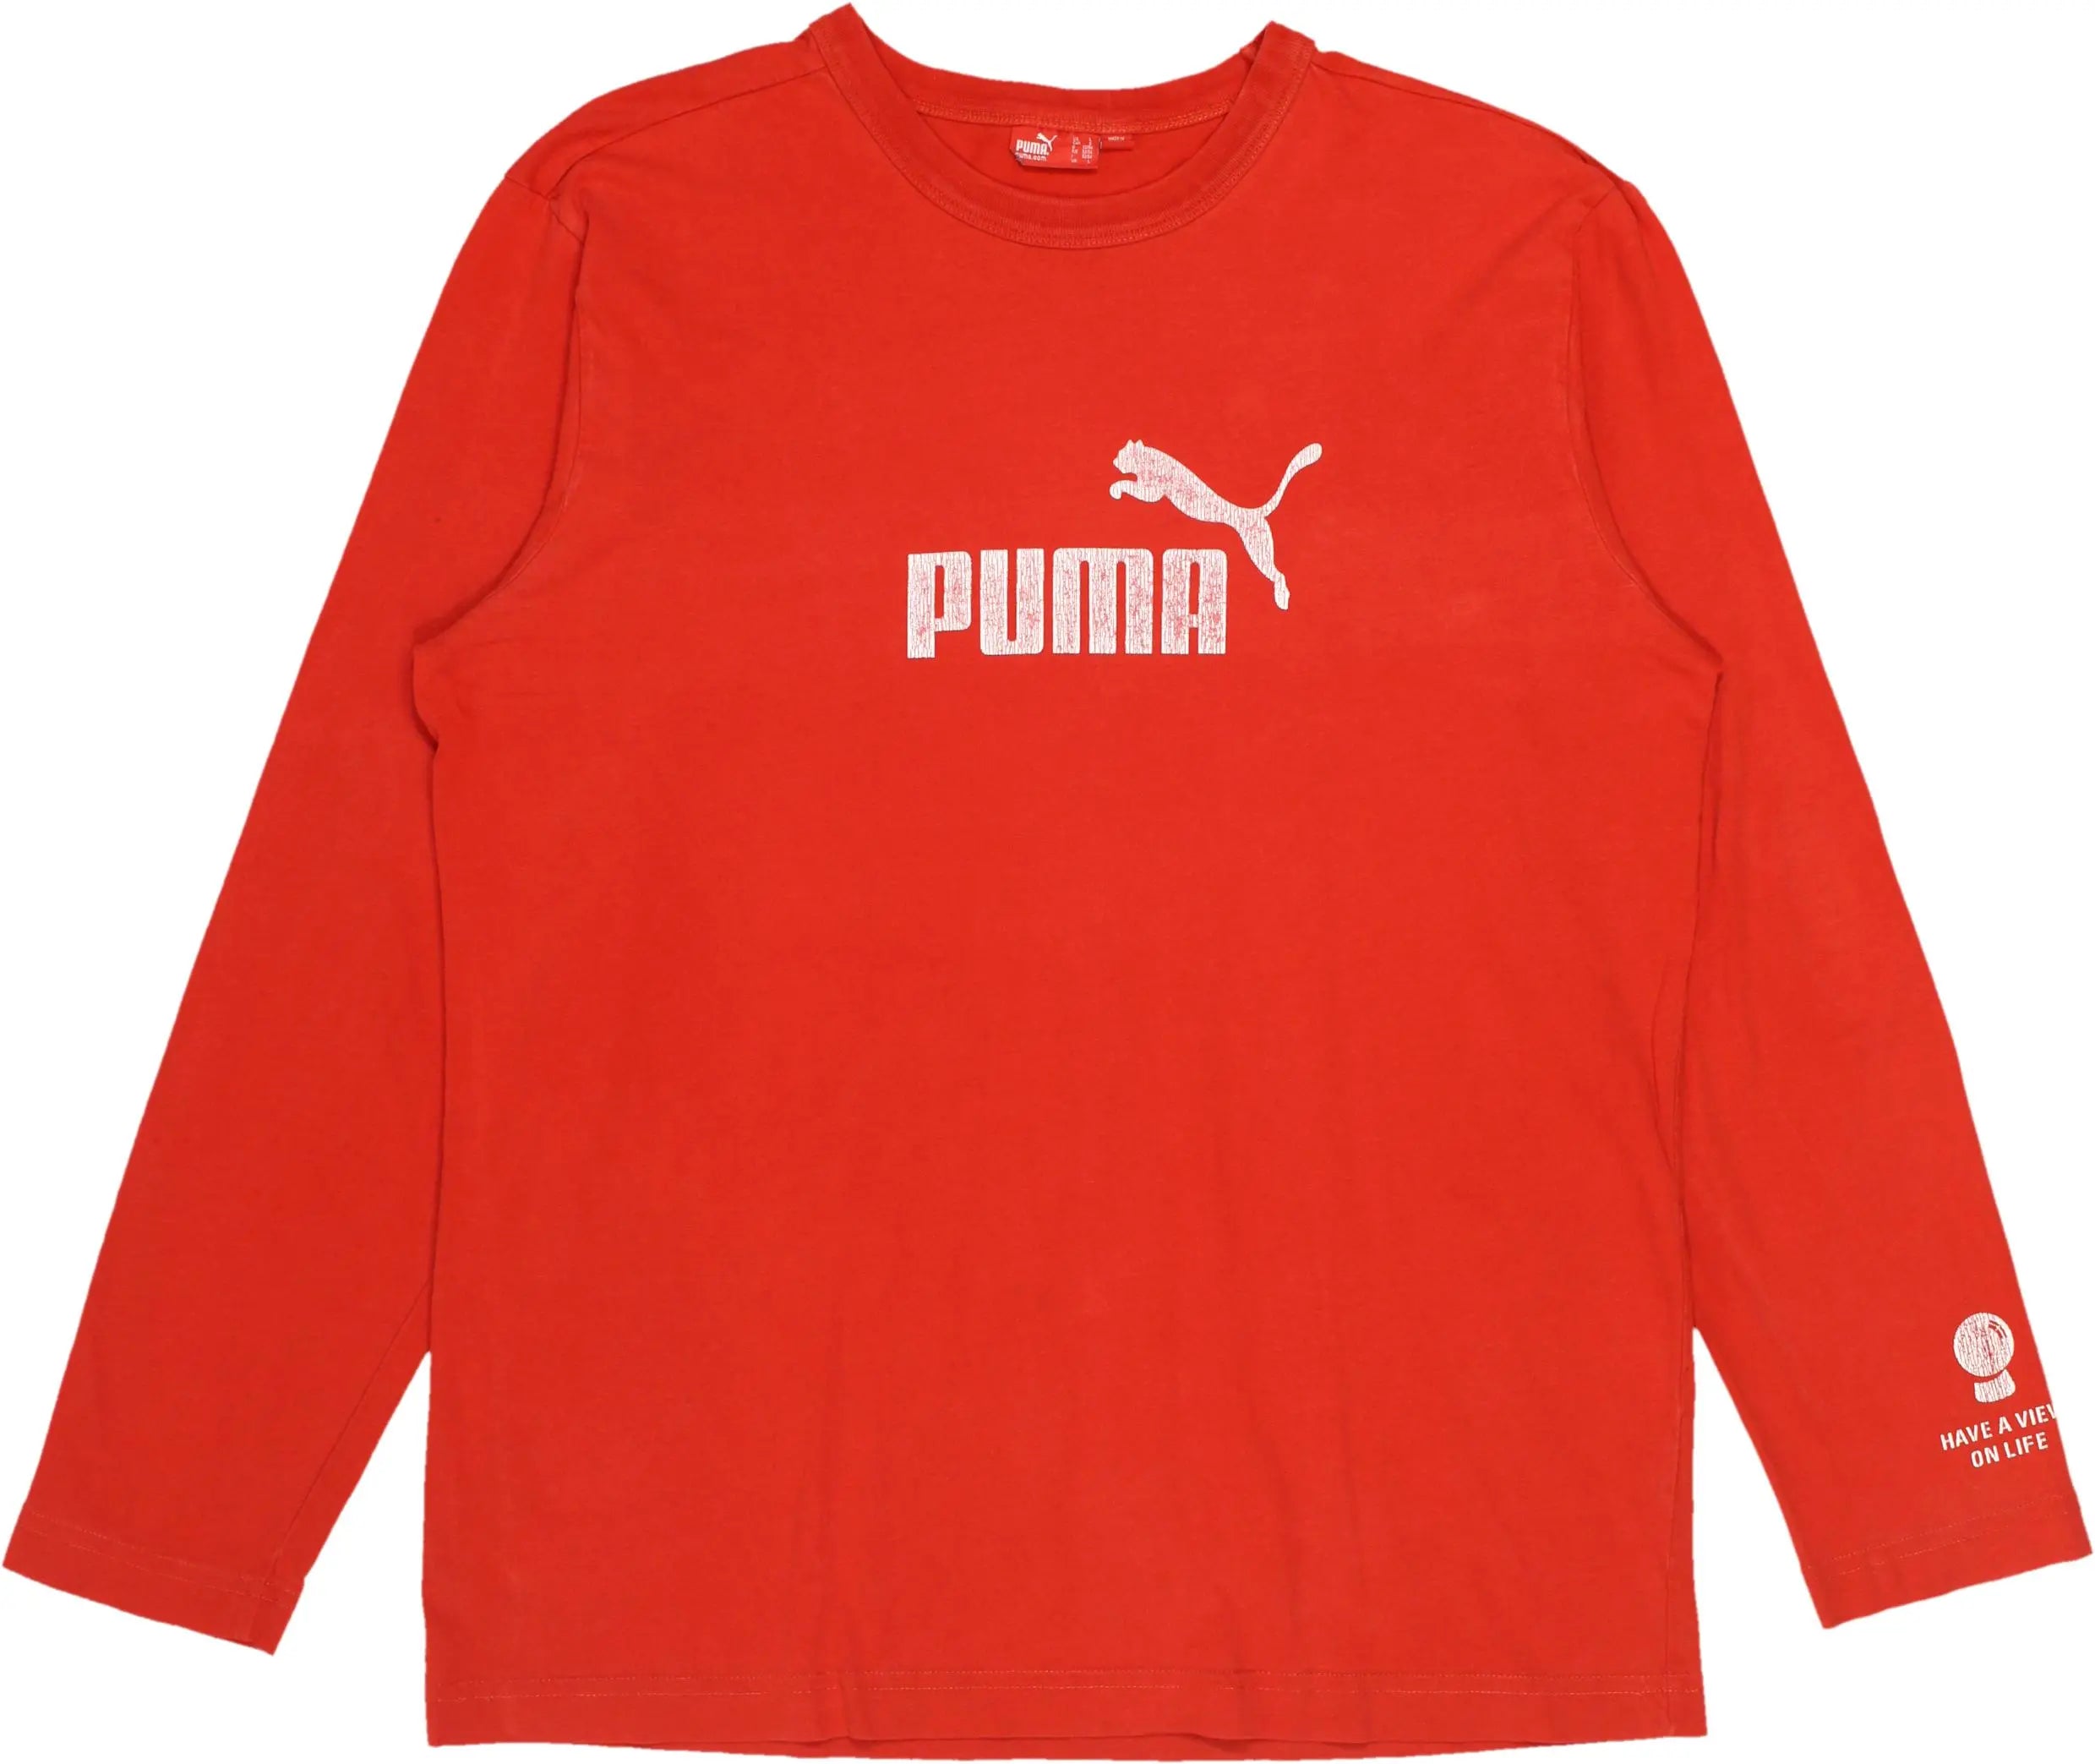 Puma - Red Long Sleeve Shirt by Puma- ThriftTale.com - Vintage and second handclothing